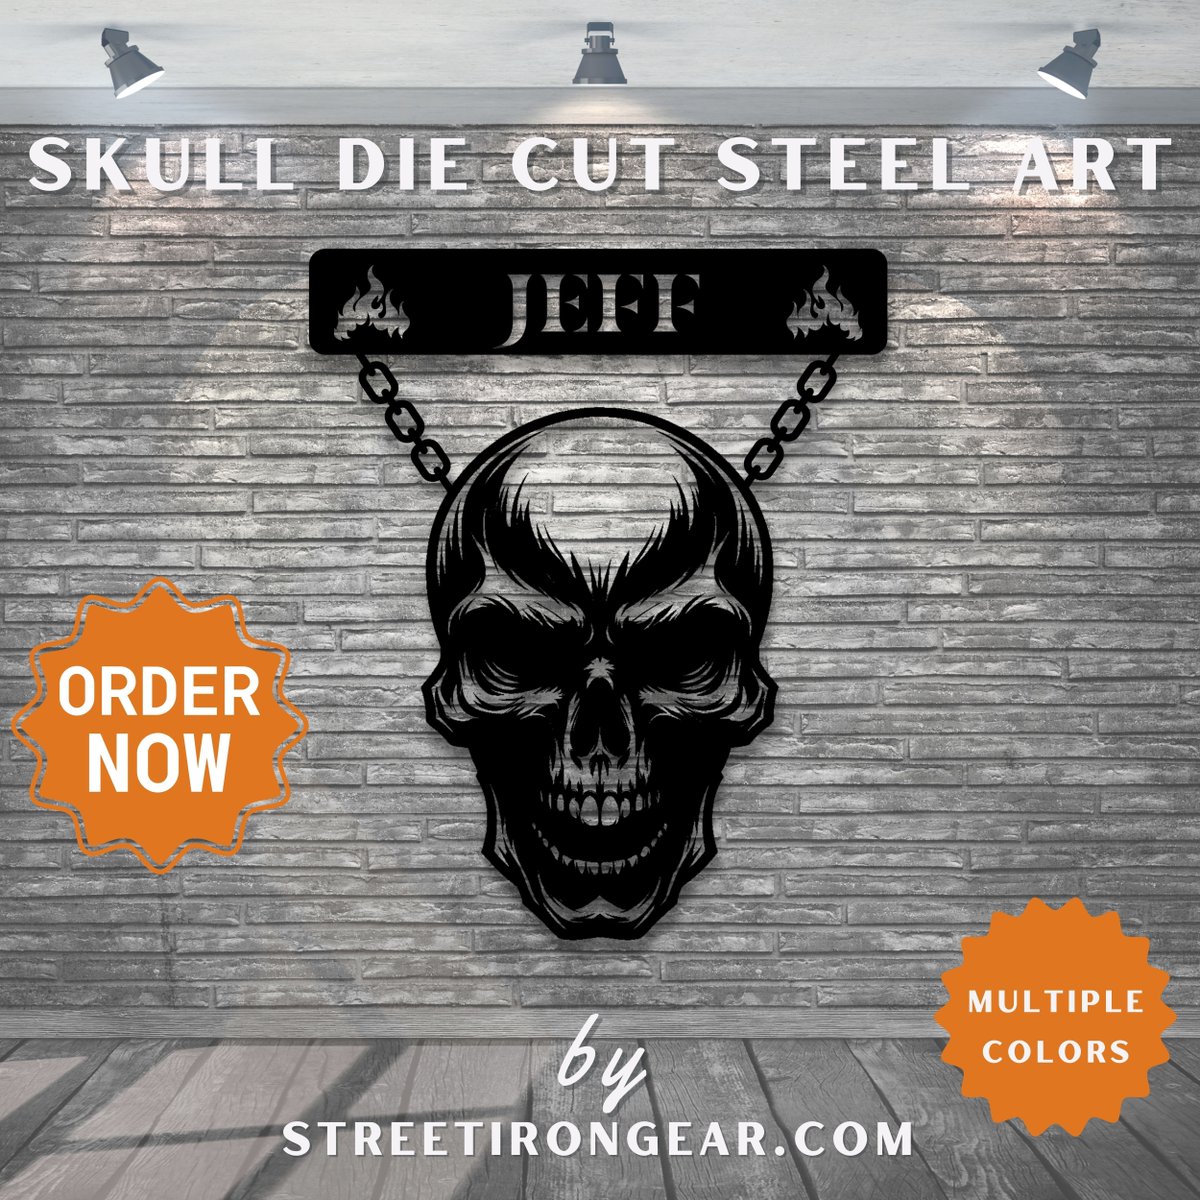 Moto to CanAm and Skull Metal Signs, find the perfect piece that screams you! Perfect for Father's Day gifts or just because. 

#StreetIronGear #MetalArt #MotoStyle #GarageDecor #SkullArt #CanAmDesigns #HomeDecor #FathersDayGifts #DadLife 

Shop Now!
buff.ly/3UqwYMi